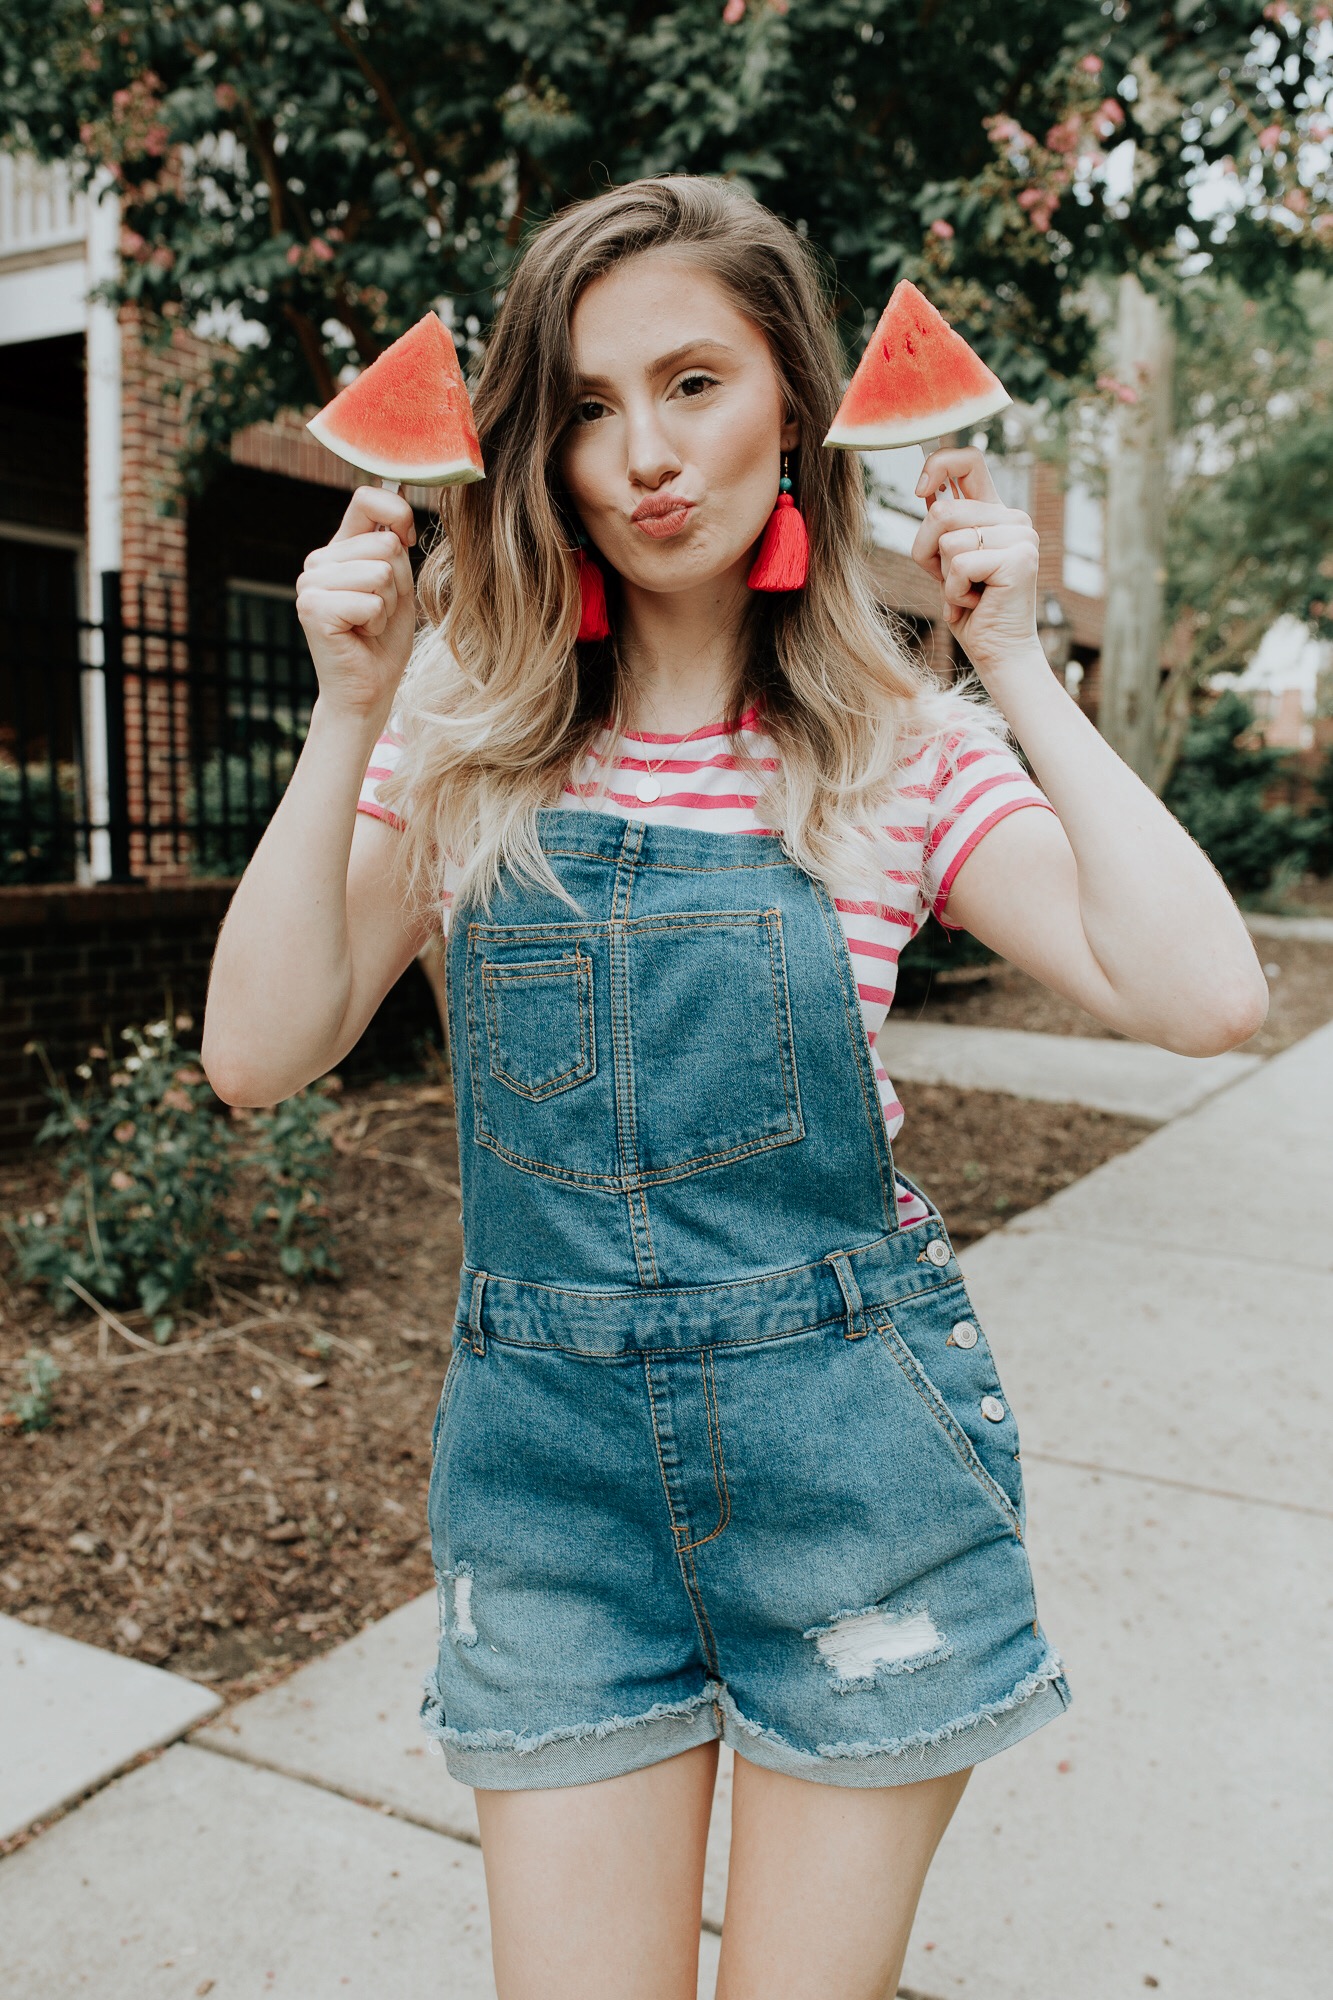 Watermelon recipes in celebration of National Watermelon Day by North Carolina fashion and lifestyle blogger Jessica Linn.